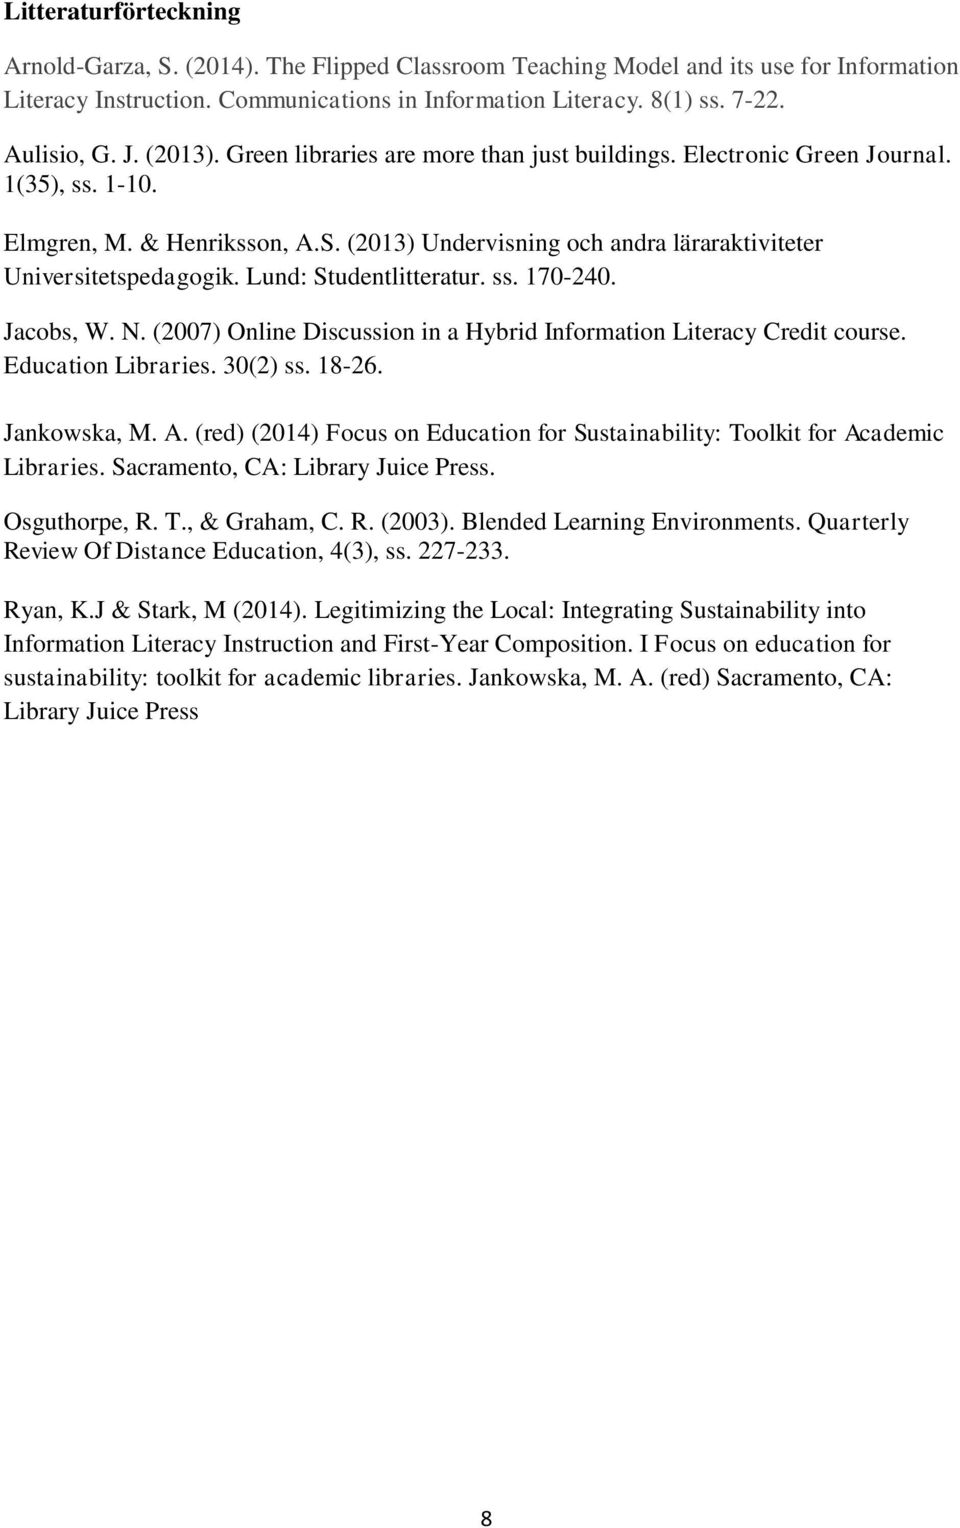 Lund: Studentlitteratur. ss. 170-240. Jacobs, W. N. (2007) Online Discussion in a Hybrid Information Literacy Credit course. Education Libraries. 30(2) ss. 18-26. Jankowska, M. A.